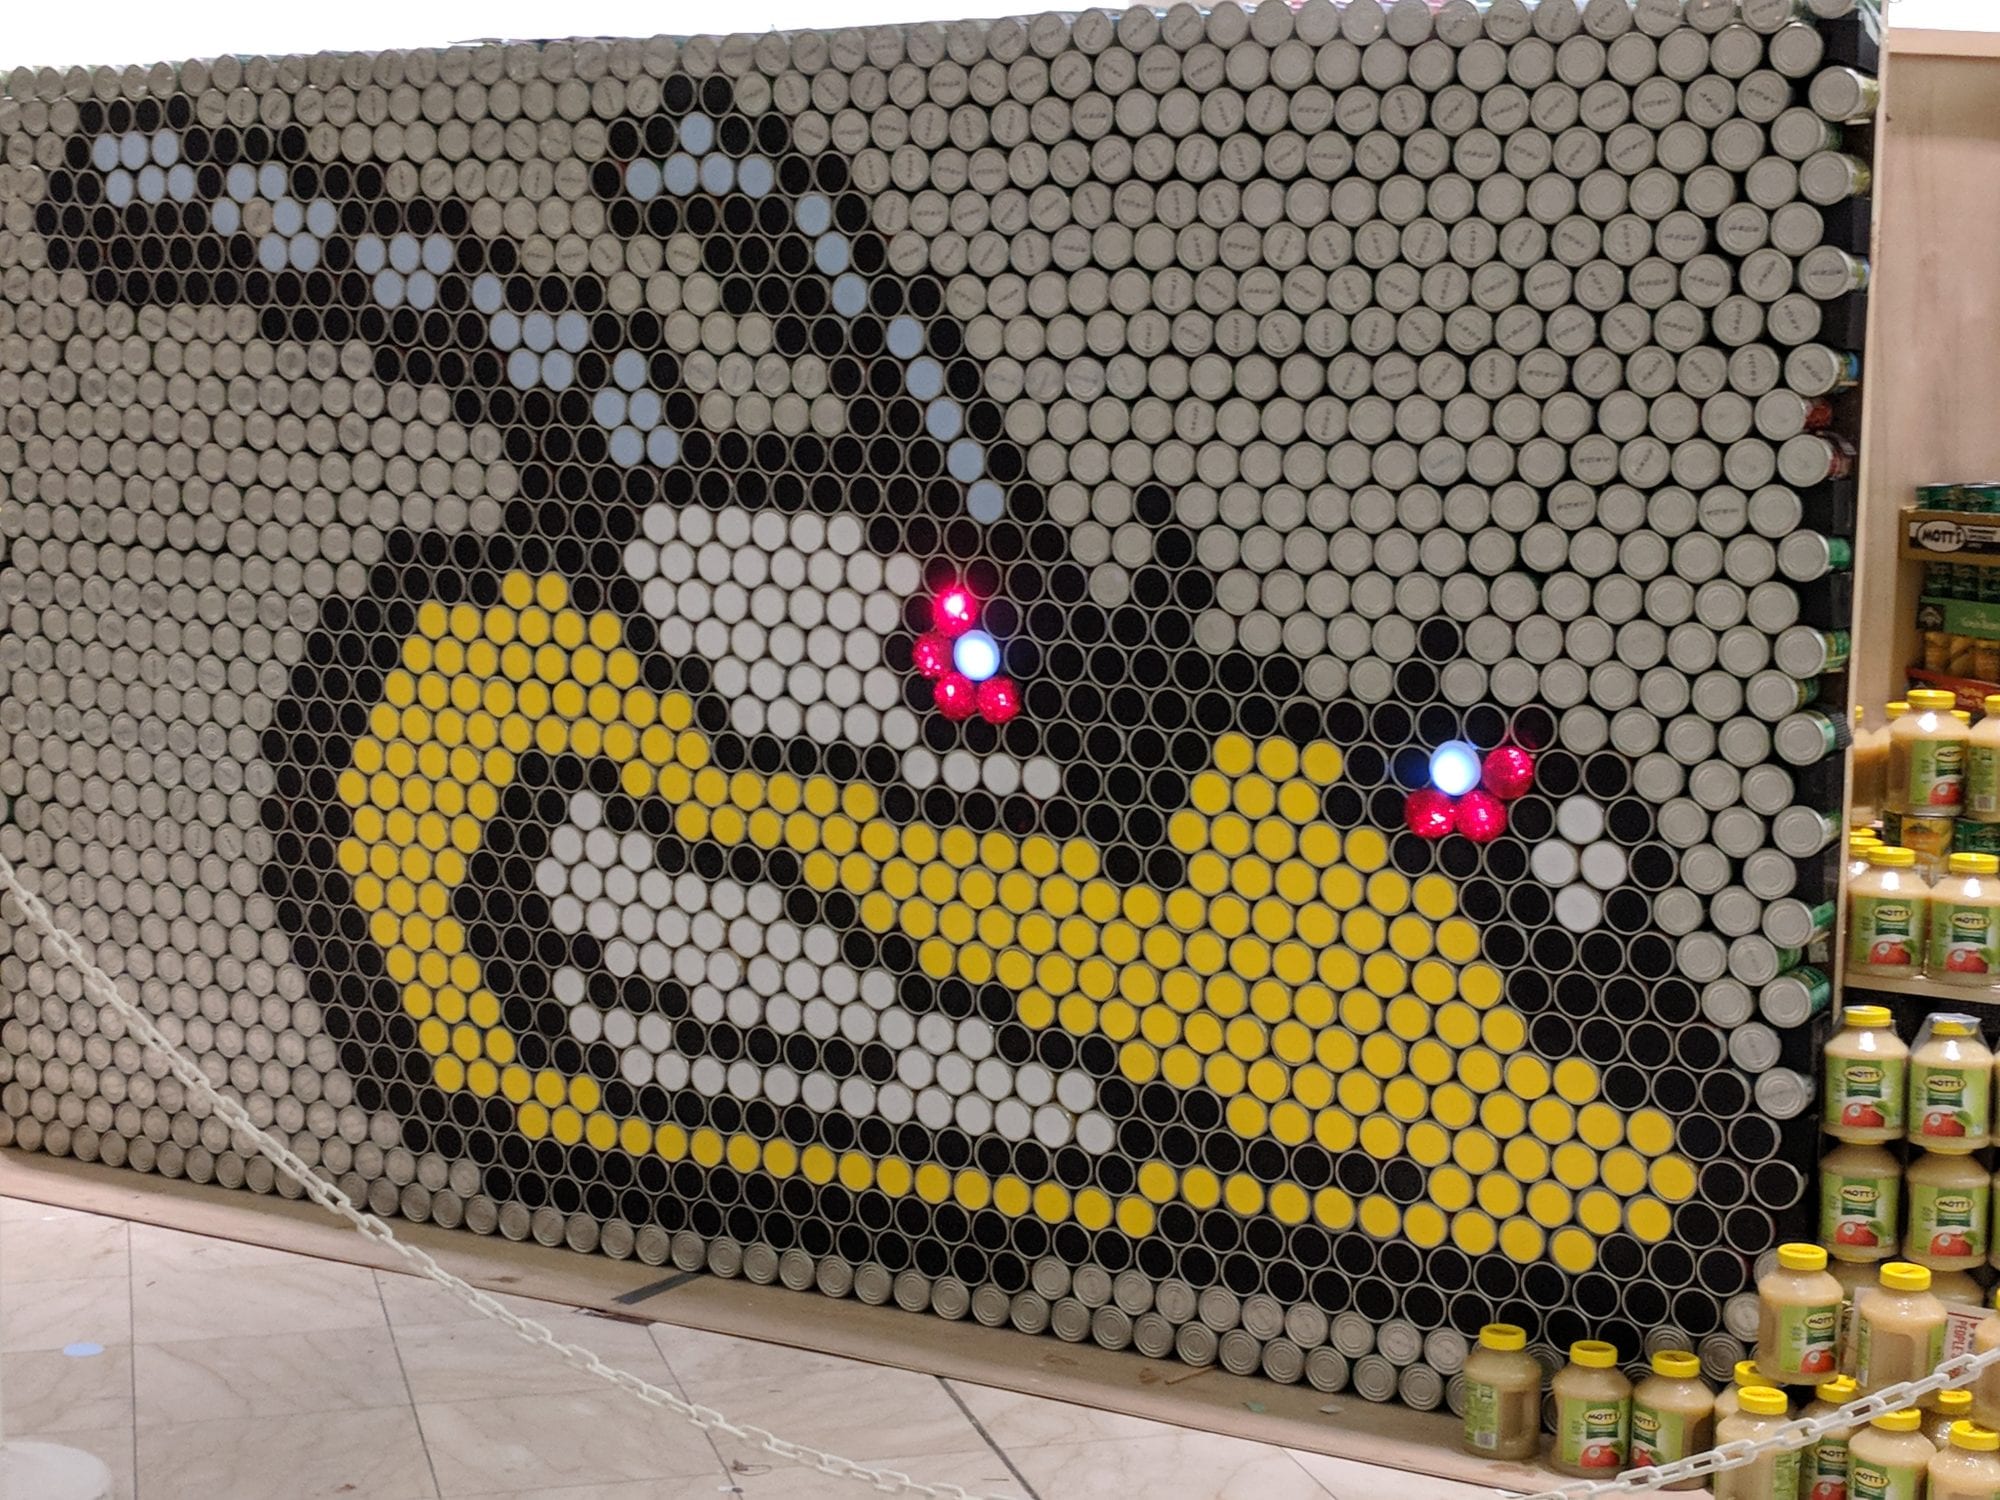 SUNY Broome students show off their talents and aid the needy with Canstruction